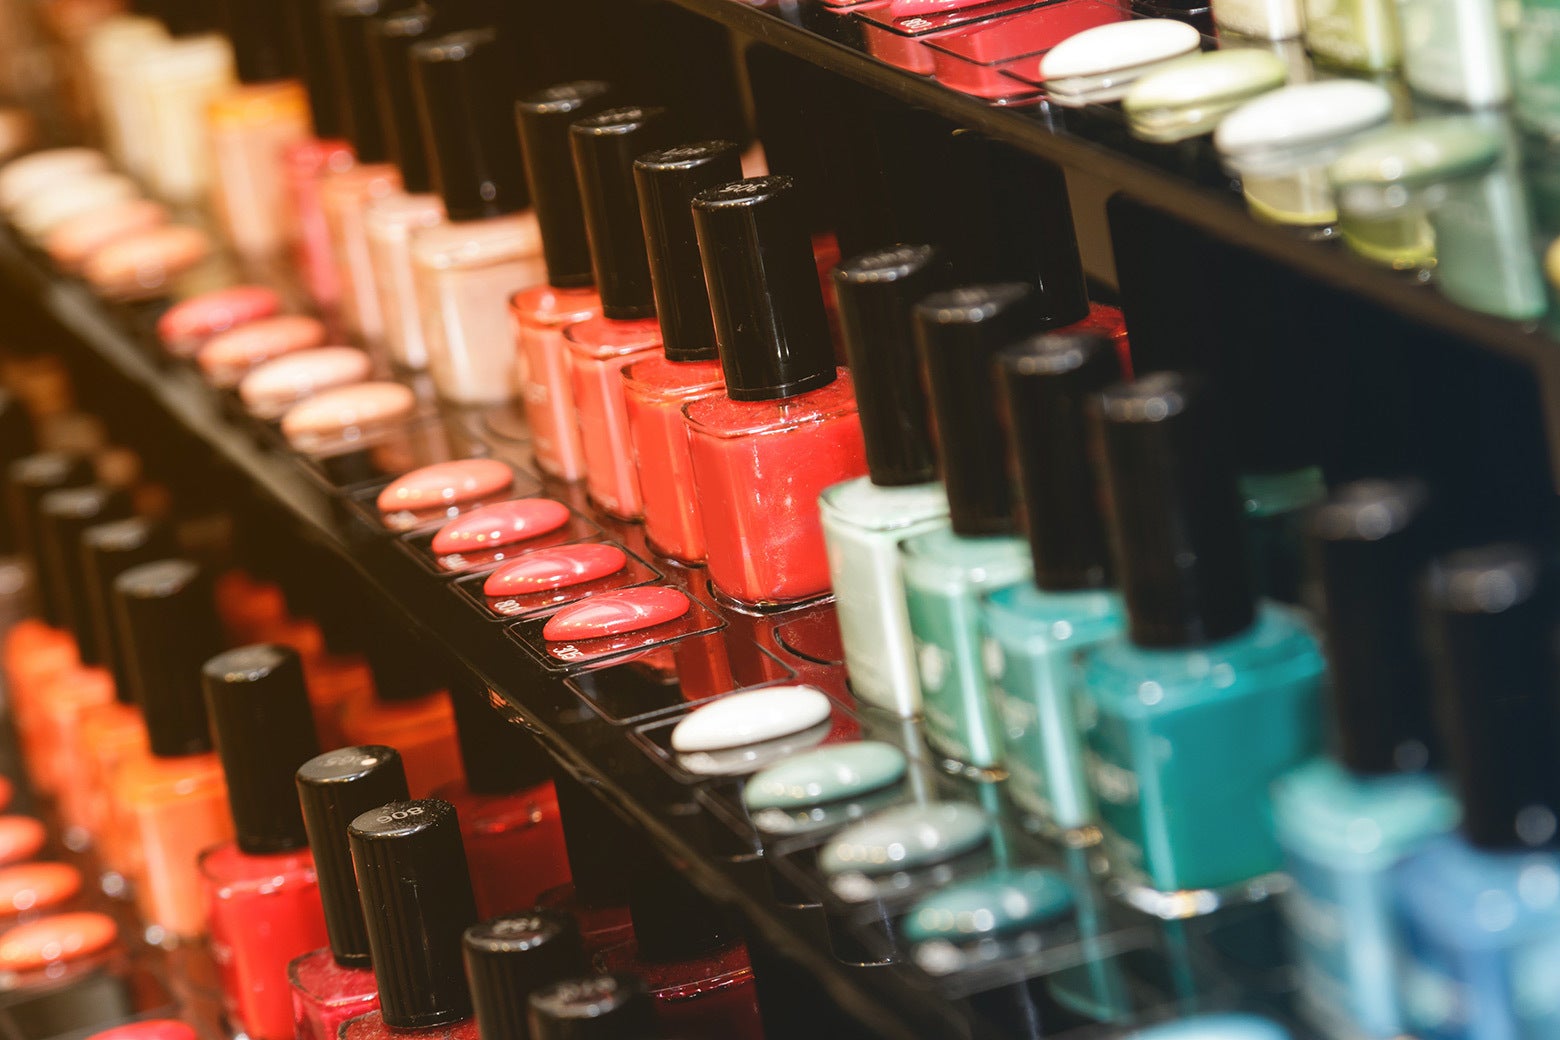 21 Safe Non Toxic Nail Polish Brands For A Healthy Chip-Free Manicure -  ella+mila